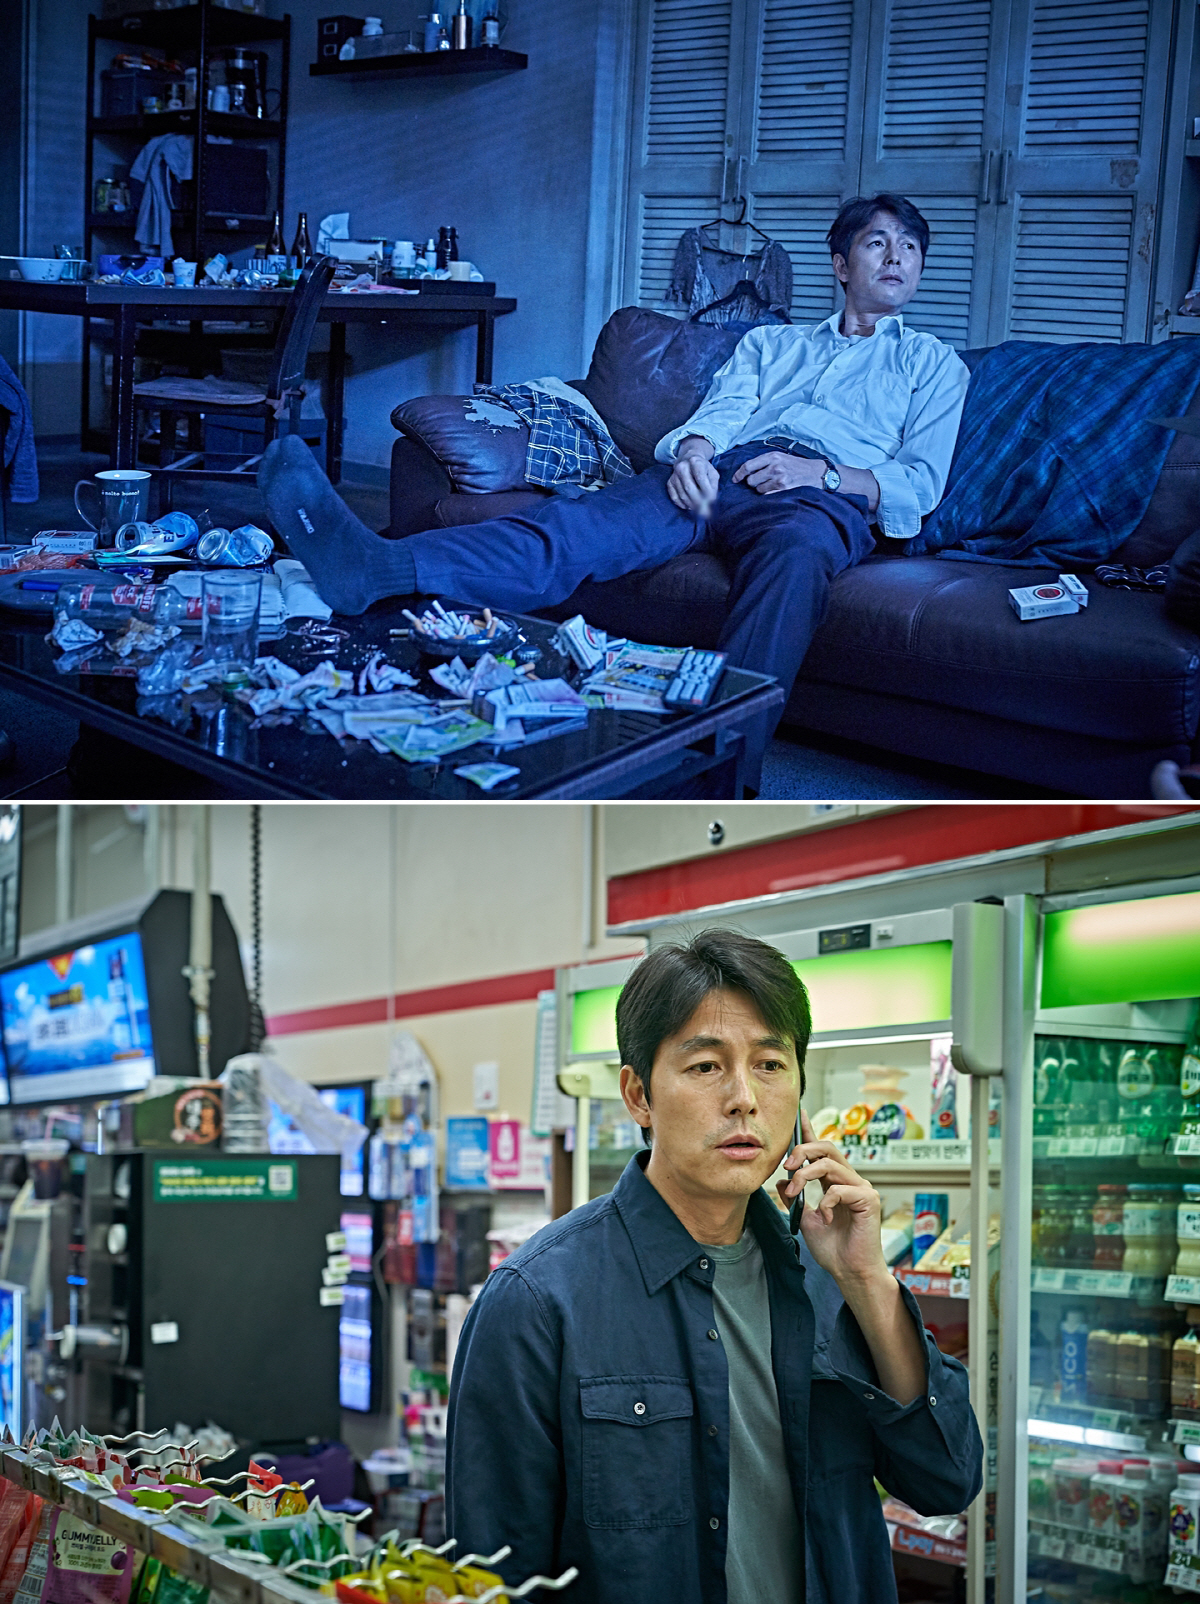 Jung Woo-sung of the crime thriller The Beasts Who Want to Hold the Jeep (directed by Kim Yong-hoon, produced by BA Entertainment and Megabox Central PlusM) boldly breaks away from the existing charismatic image and transforms into a human aspect of Reversal story.Jung Woo-sung, who has won the 55th Baeksang Arts Grand Prize in the film category and the 40th Blue Dragon Film Award for Best Actor, has won the best prime time and is attracting attention by foreshadowing a new character completely different from the existing image through Beasts who want to catch straw.Jung Woo-sung, who showed a heavy and charismatic charm through works such as Steel Rain, The King and Asura, showed a strong and soft appearance in the works of Witness and Do not forget me, capturing the attention of Audiences with a wide range of character digestive power.Jung Woo-sung, who has been transforming freely from charismatic intense appearance to human beauty through his previous work, has completed a character that is completely different from the role he has played in the animals that want to catch even straw.Taeyoung, who was Acted by Jung Woo-sung in The Animals Who Want to Hold a Jeep, is a character who prepares for the last Hantang because of the debt left by his ex-girlfriend. It is a character who wittyly expresses the ironic situation in the process of developing a tense story.Jung Woo-sung will show various aspects from the charm of Reversal story to the human charm that reveals indecisive and desperate appearance in front of the opportunity of life through this work and add fun of the drama.Jung Woo-sung said, It is the most passive and indecisive role I have ever played.It is a human character who pretends to be strong without being strong. Jeon Do-yeon, who first breathed through The Animals Who Want to Hold a Jeep, said, I wondered what kind of picture Jung Woo-sung and Jeon Do-yeon would have when they met in the movie.Acting with Jung Woo-sung was a new experience, he said.In addition, director Kim Yong-hoon said, It was fun to get out of the stereotyped image that the public thinks, and I tried to express the natural Jung Woo-sung rather than making a big change.The animals that want to catch straws, based on the same novel by Sonne Kaske, are criminal dramas of ordinary humans planning the worst of the worst to take the money bag, the last chance of life.Jeon Do-yeon, Jung Woo-sung, Bae Sung-woo, Jung Man-sik, Jin Kyung, Shin Hyun Bin, Jungaram, Park Ji-hwan, Kim Jun-han, Heo Dong-won and Yoon Yeo-jung.It is scheduled for release in February 2020.